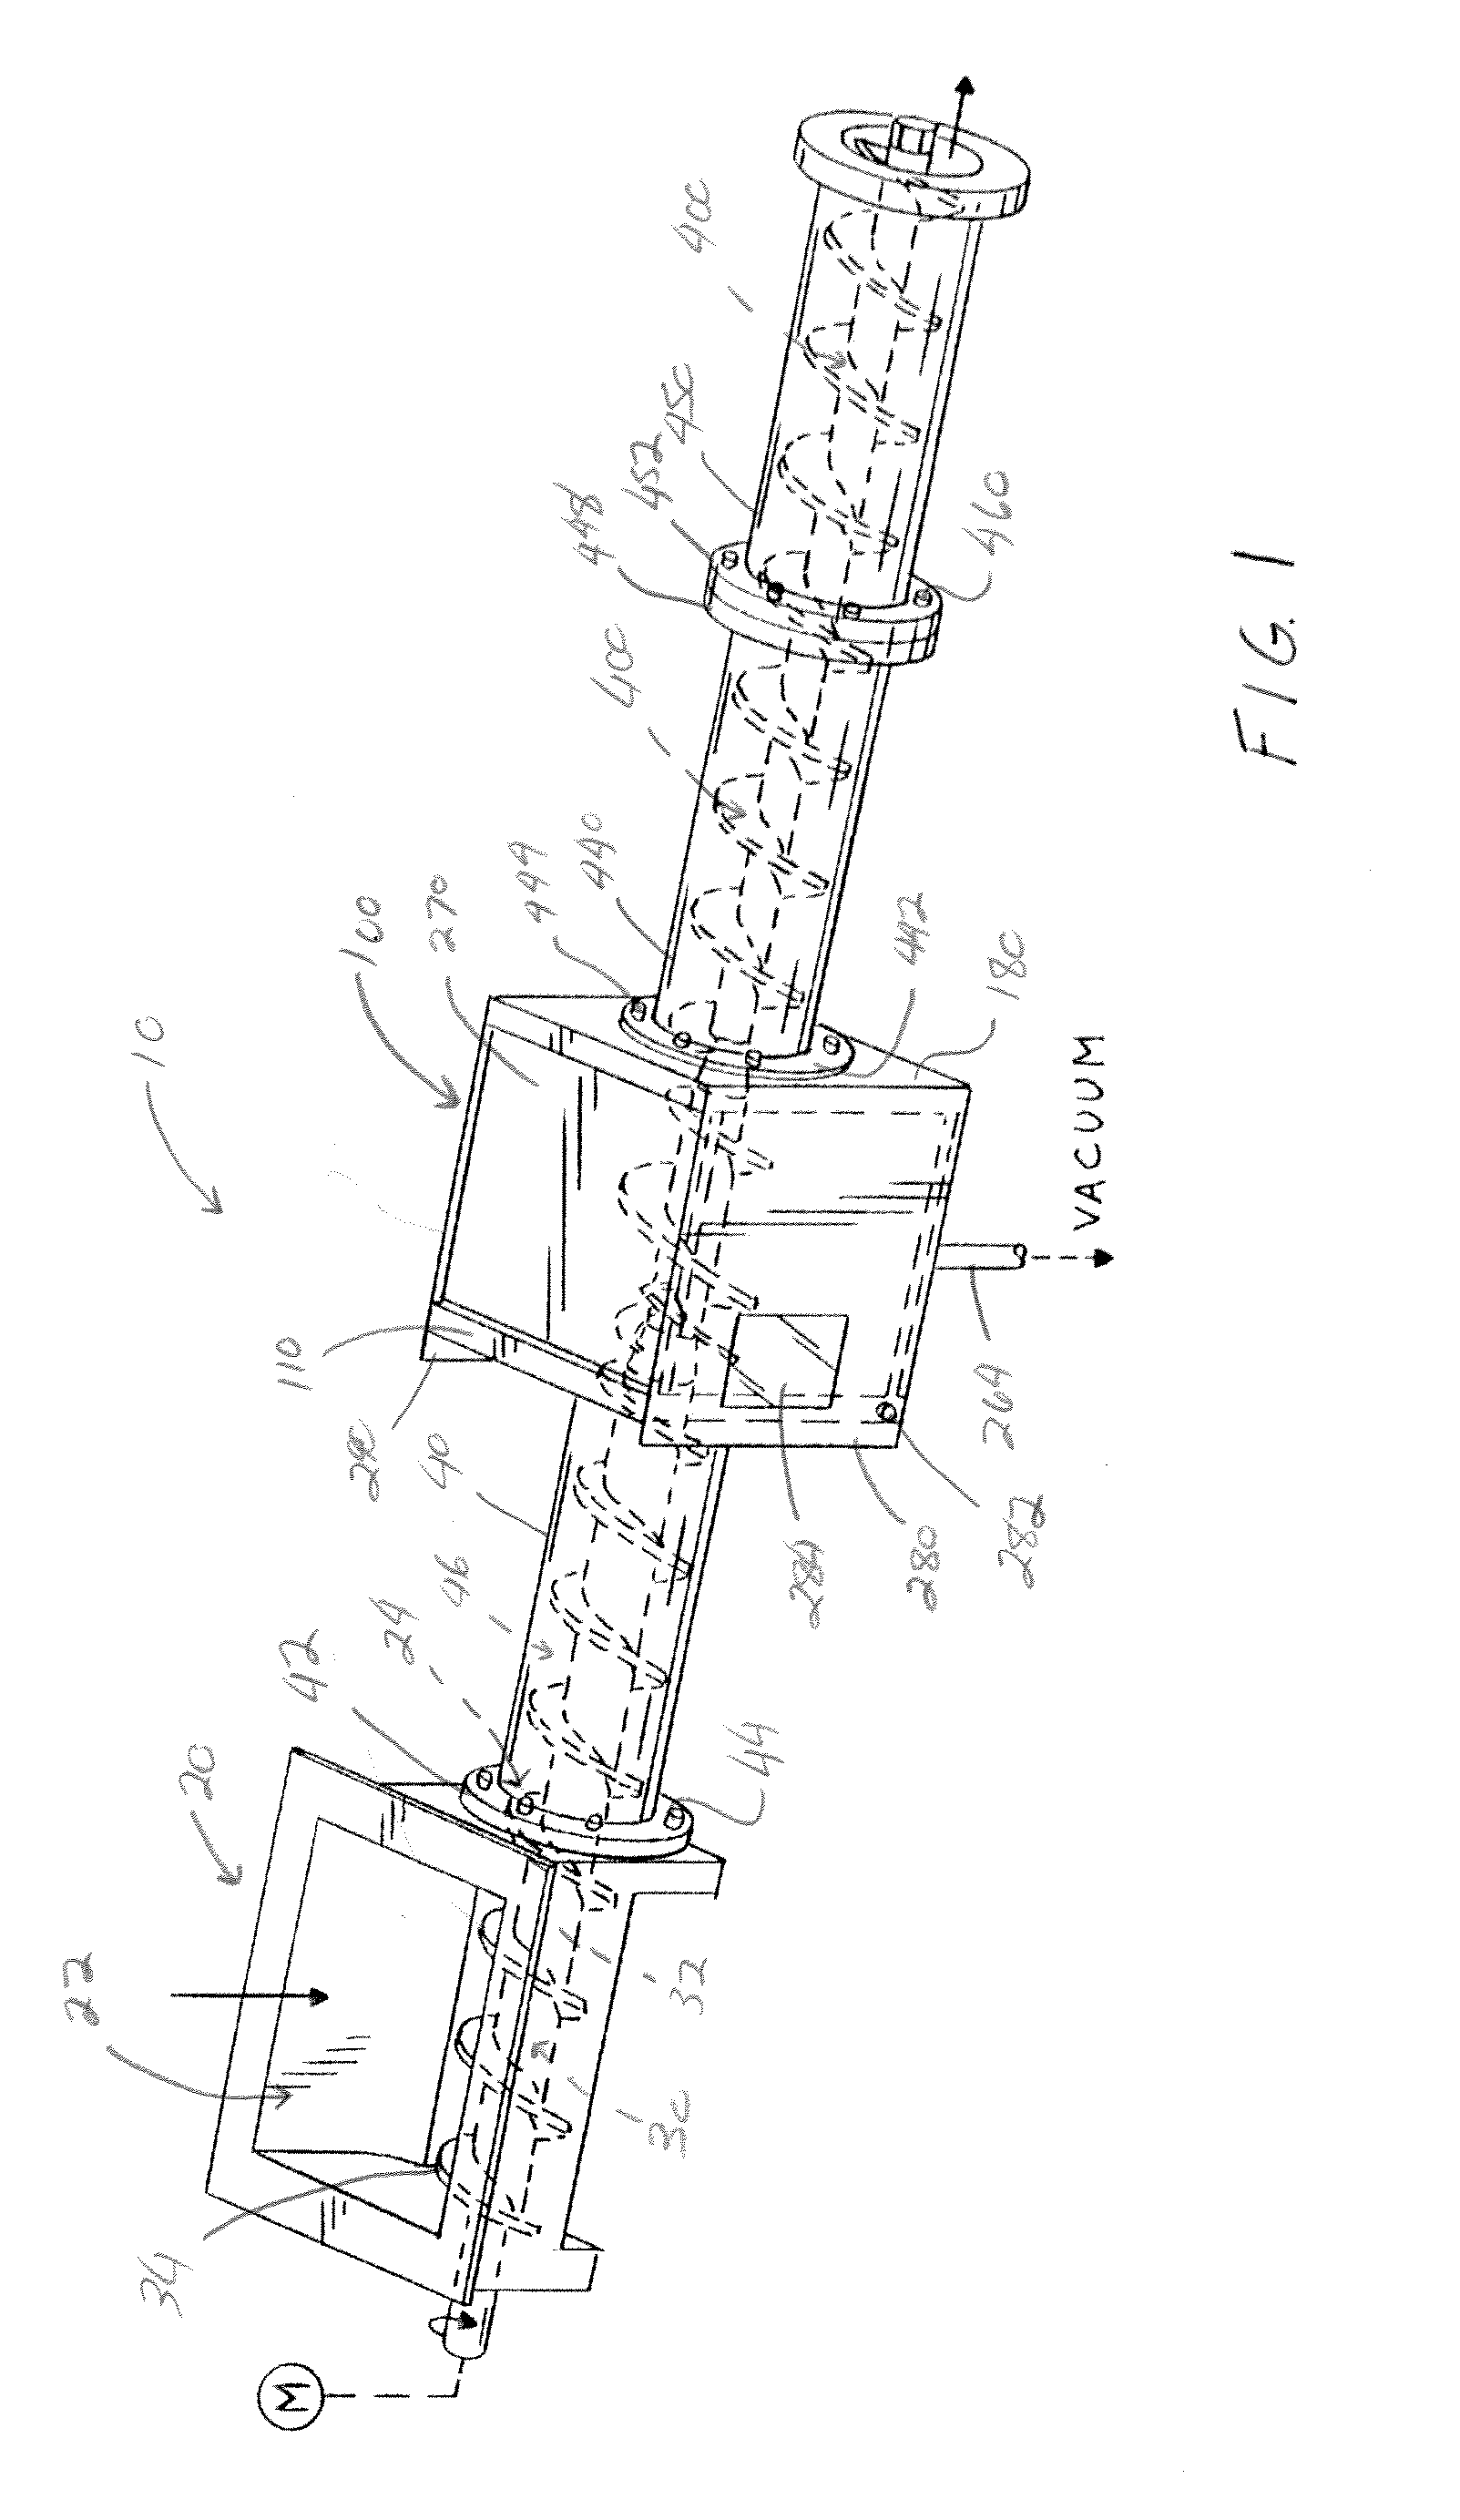 Apparatus and Process for De-Airing Material in an Extruder